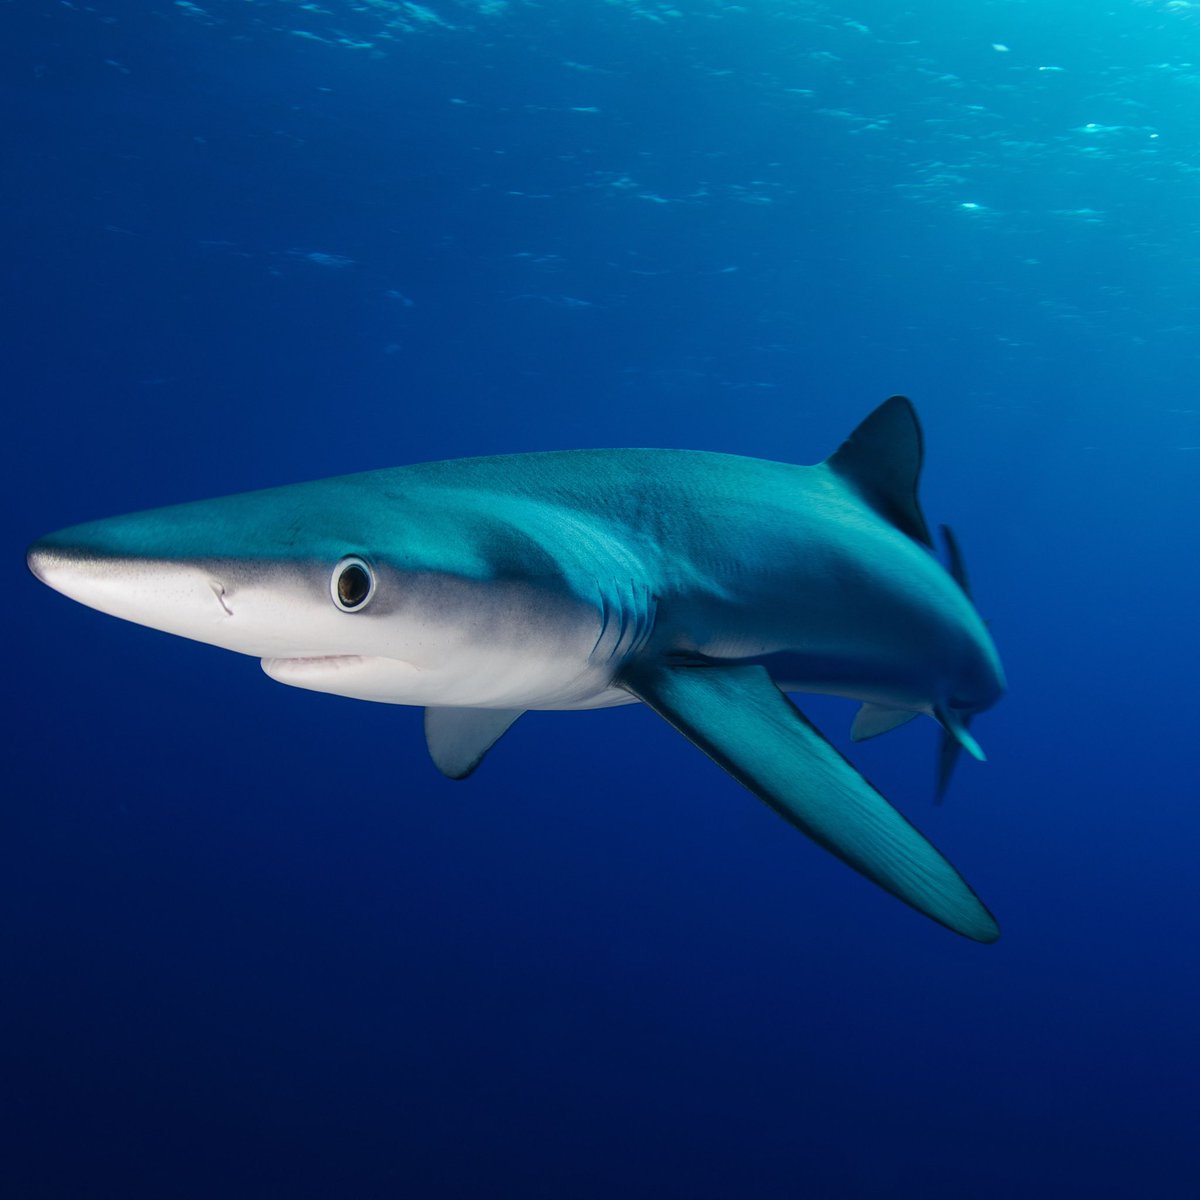 #12 BLUE SHARKS-skinny legends-pretty blue color-can have up to 135 pups per liter-always look confused but cute